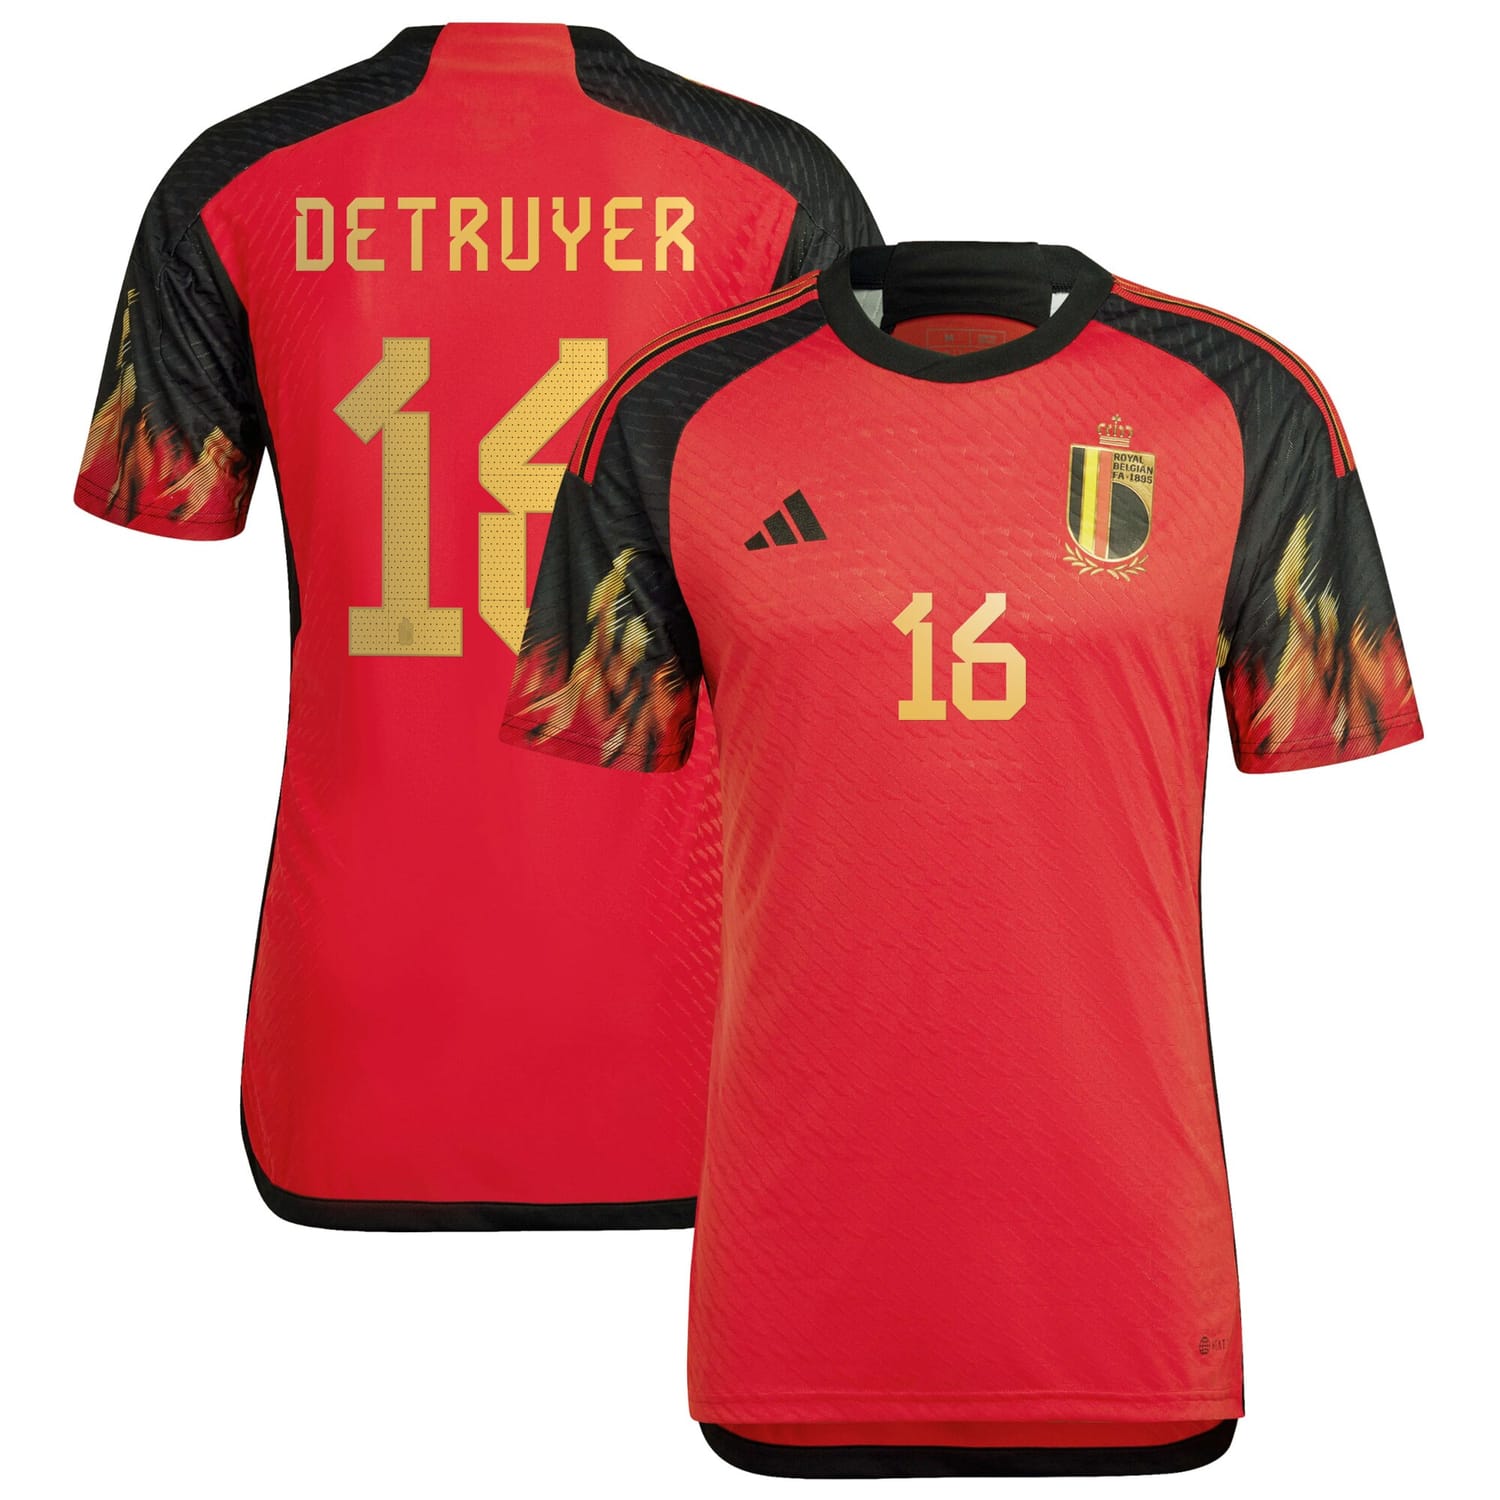 Belgium National Team Home Authentic Jersey Shirt 2022 player Marie Detruyer 16 printing for Men